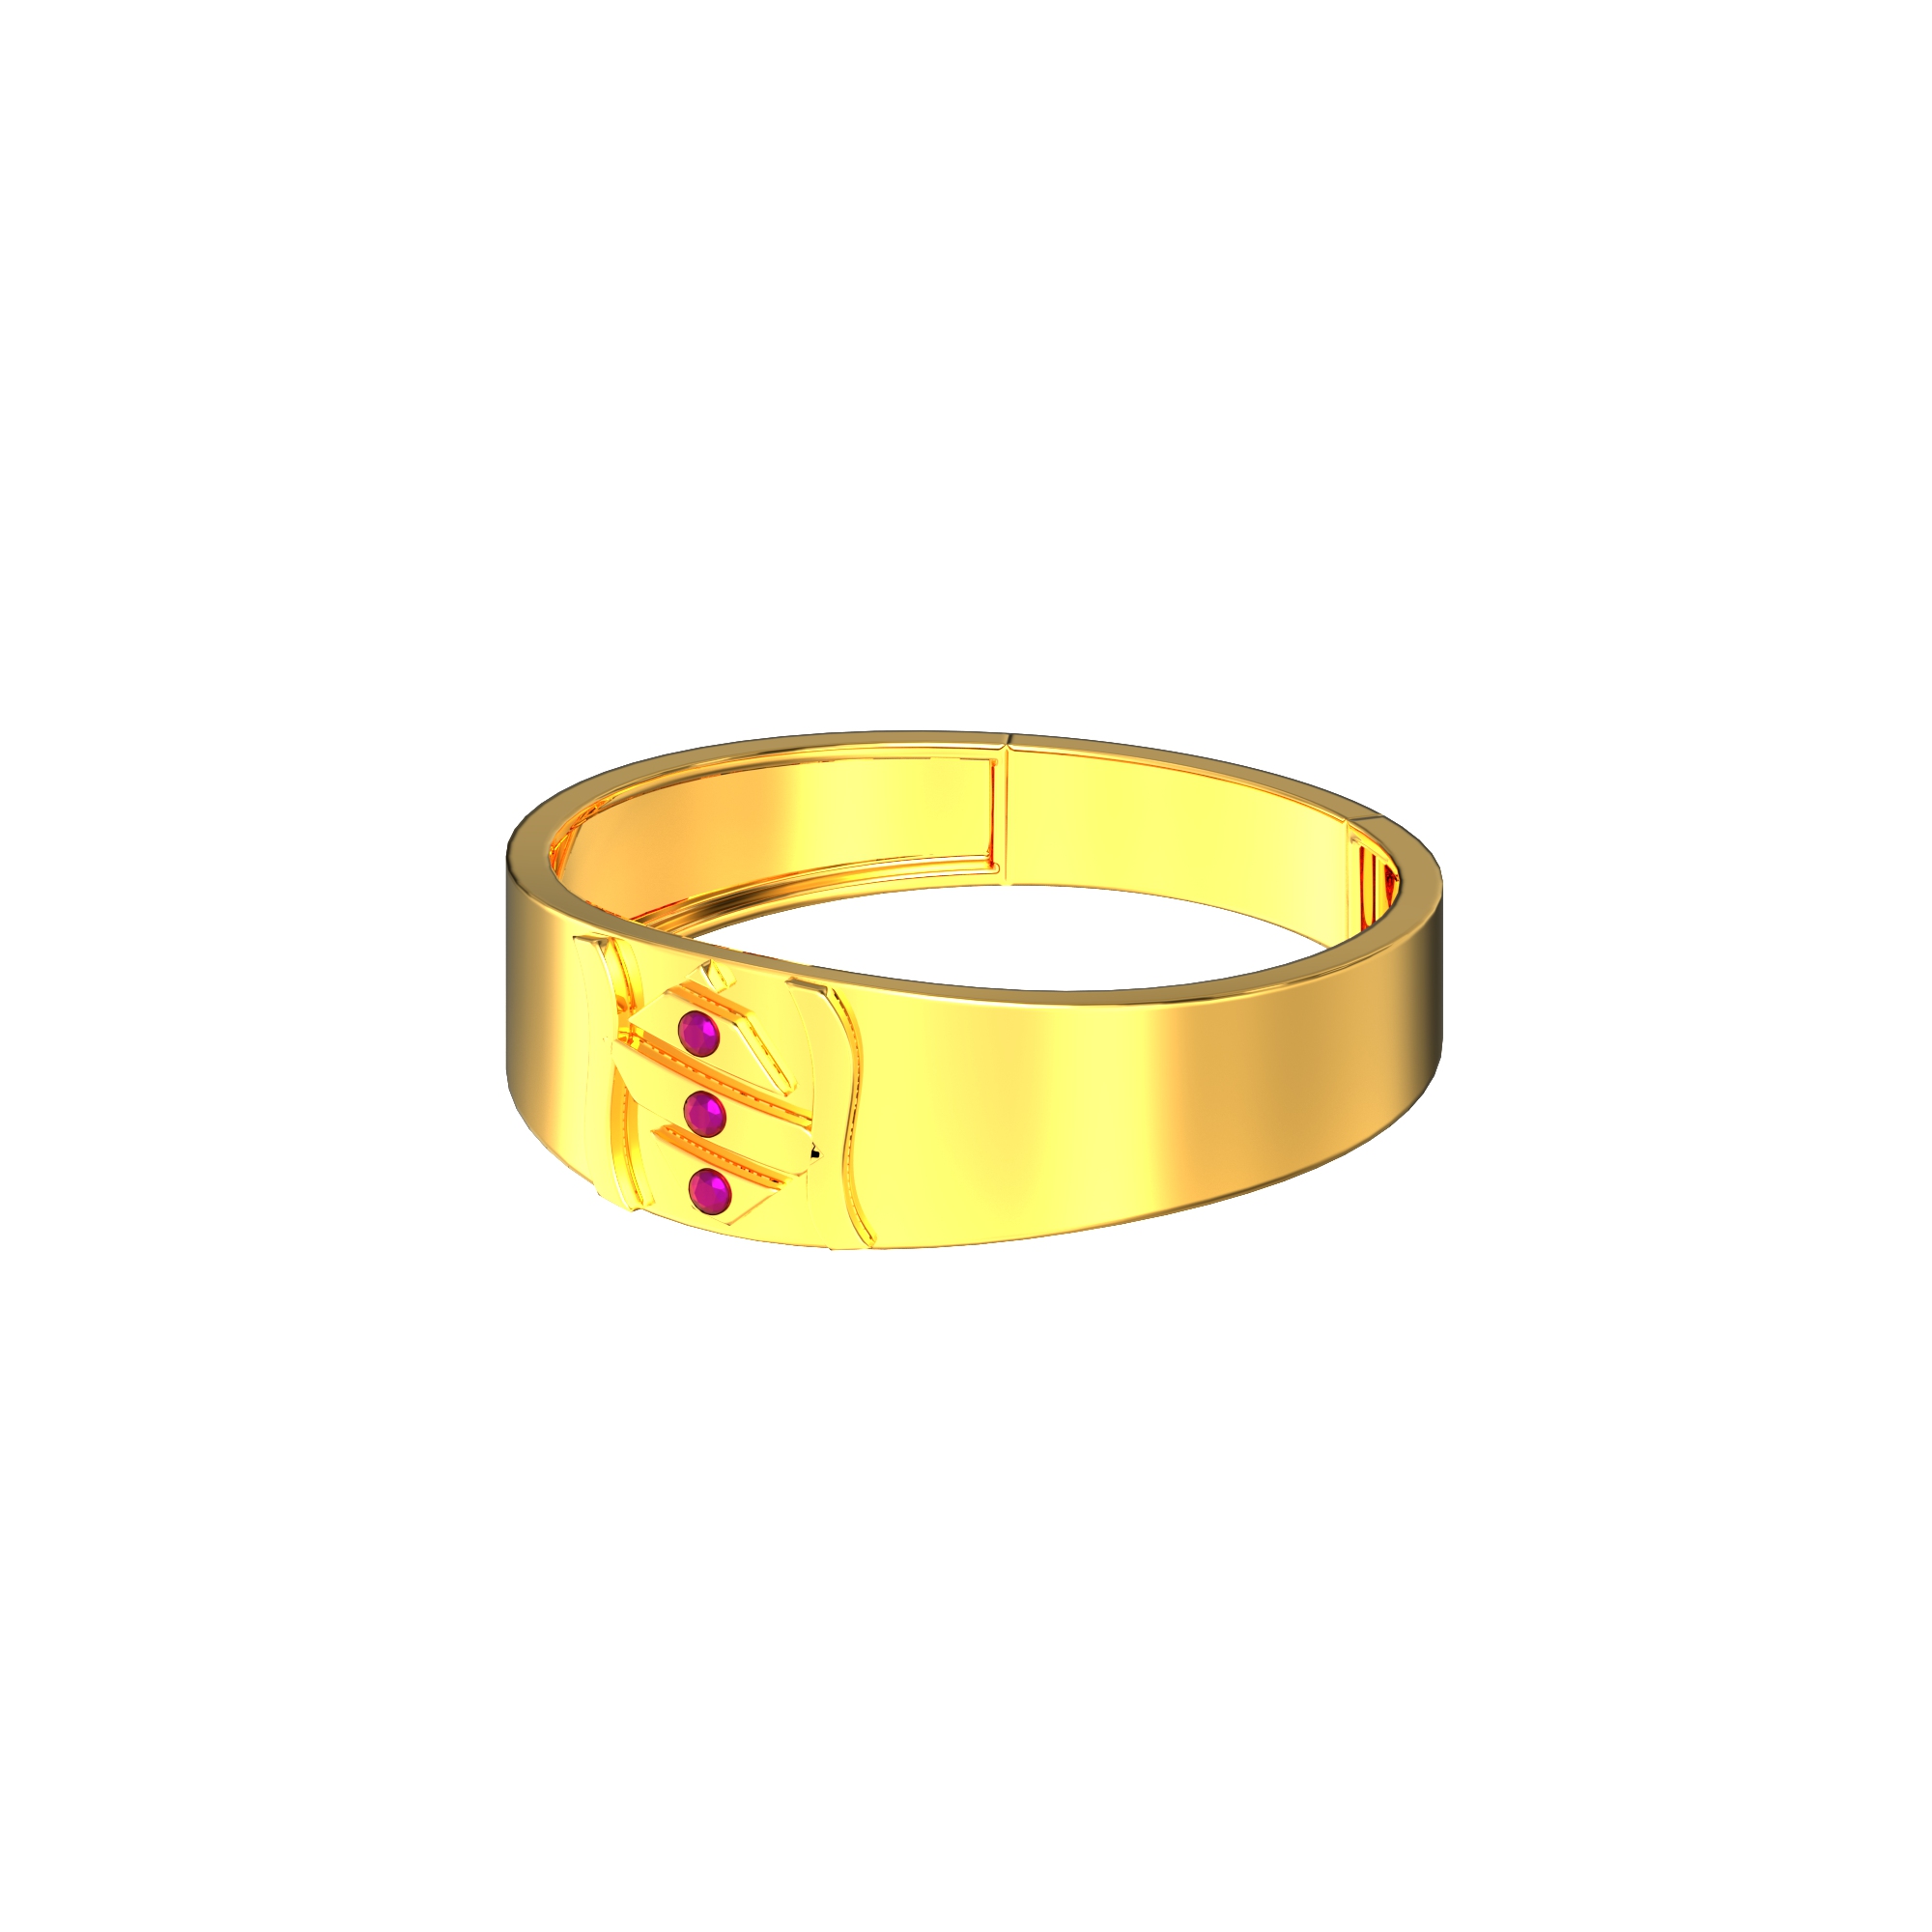 Strip Design Gents Ring with stones chennai